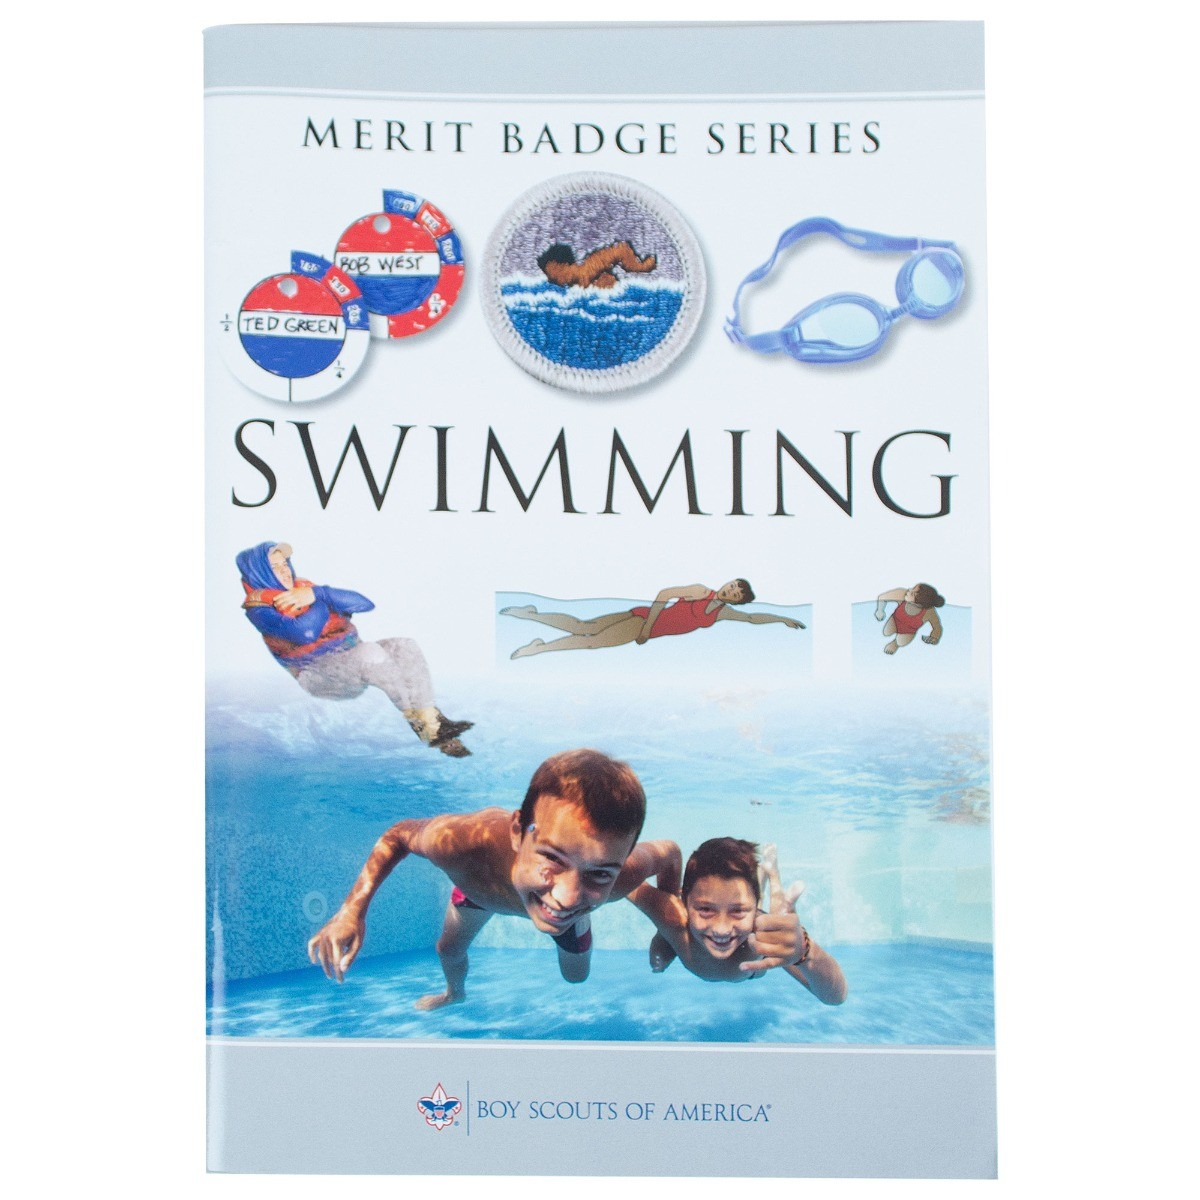 Details about   SWIMMING TYPE F MERIT BADGE   BOY SCOUT  X62 